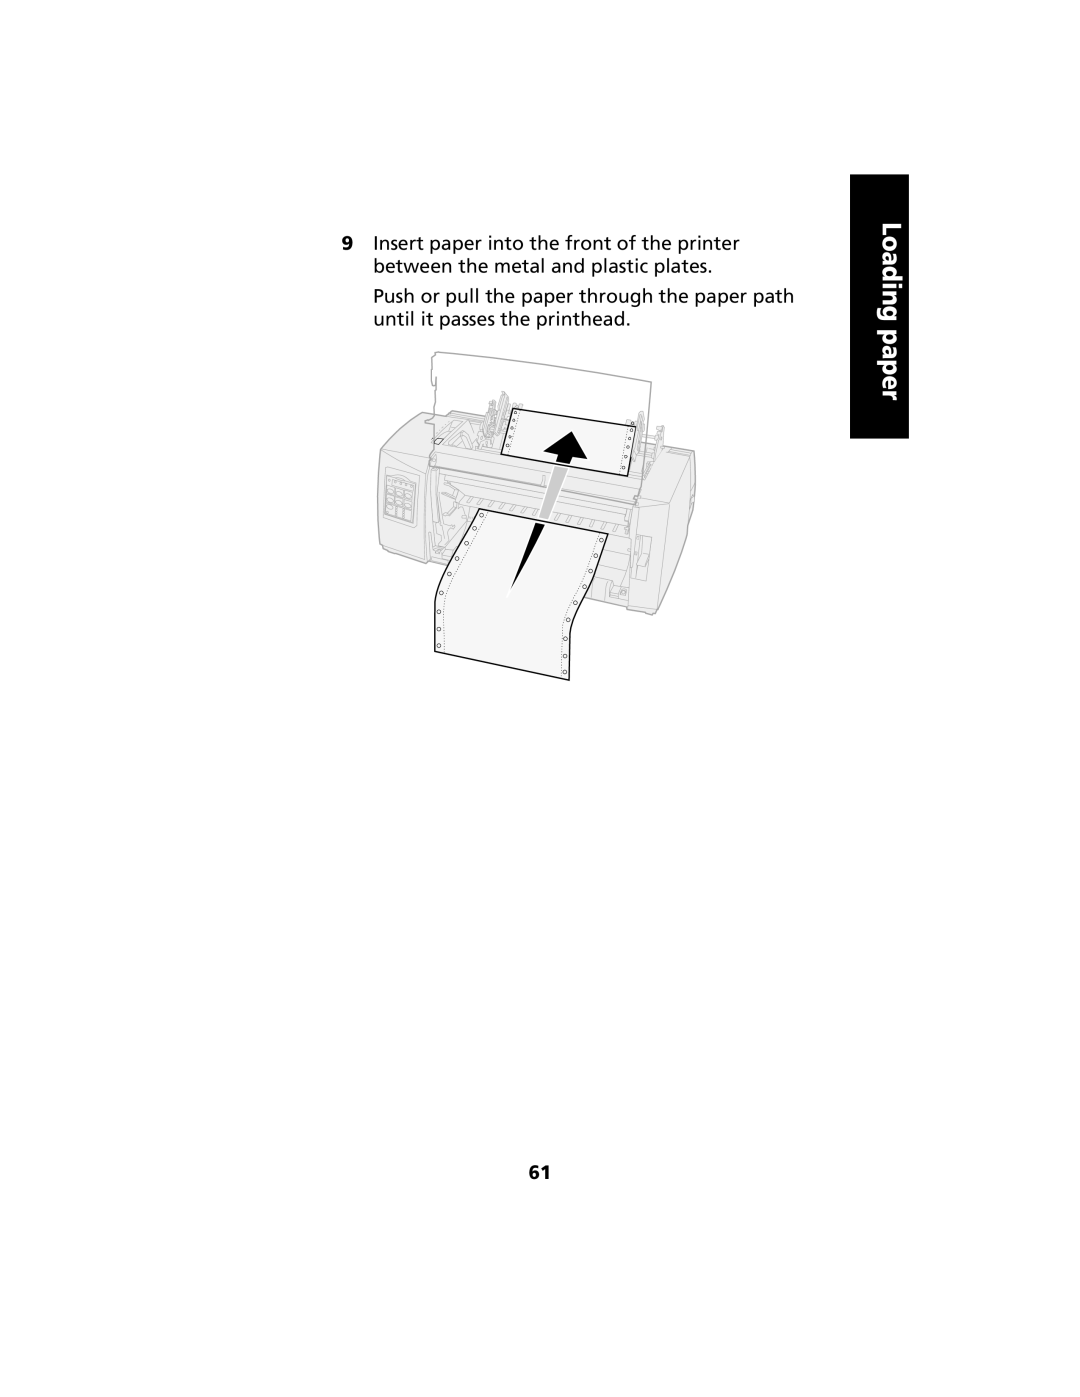 Lexmark 2480 manual Loading paper, Insert paper into the front of the printer between the metal and plastic plates 